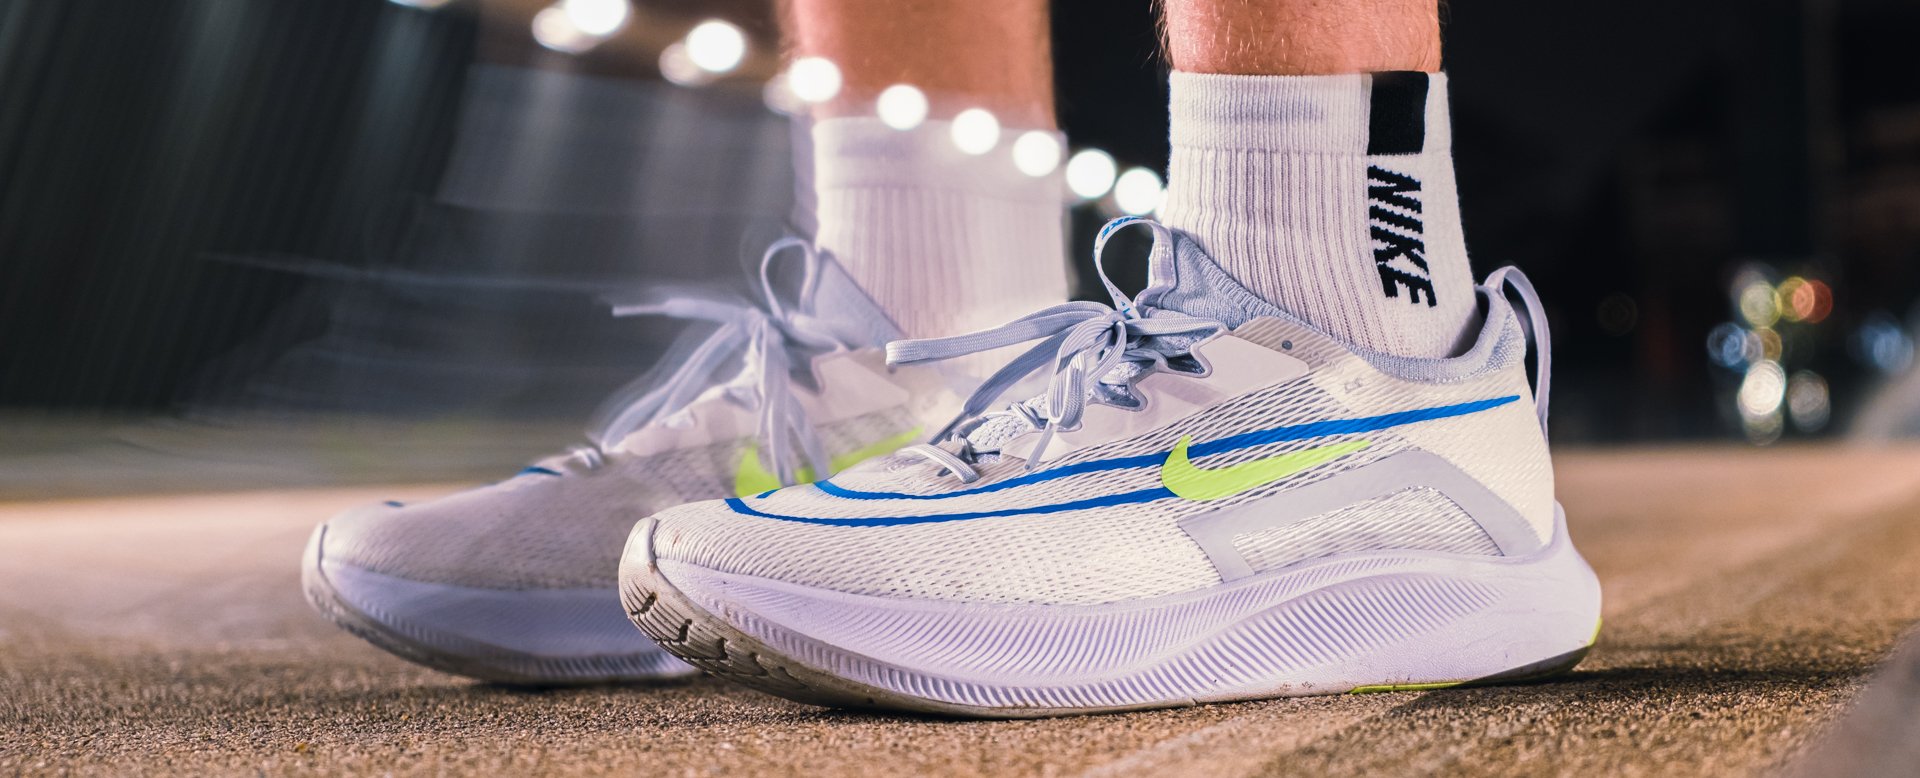 echo markt Mysterie Nike Zoom Fly 4 - A Vaporfly for the daily miles - Inspiration